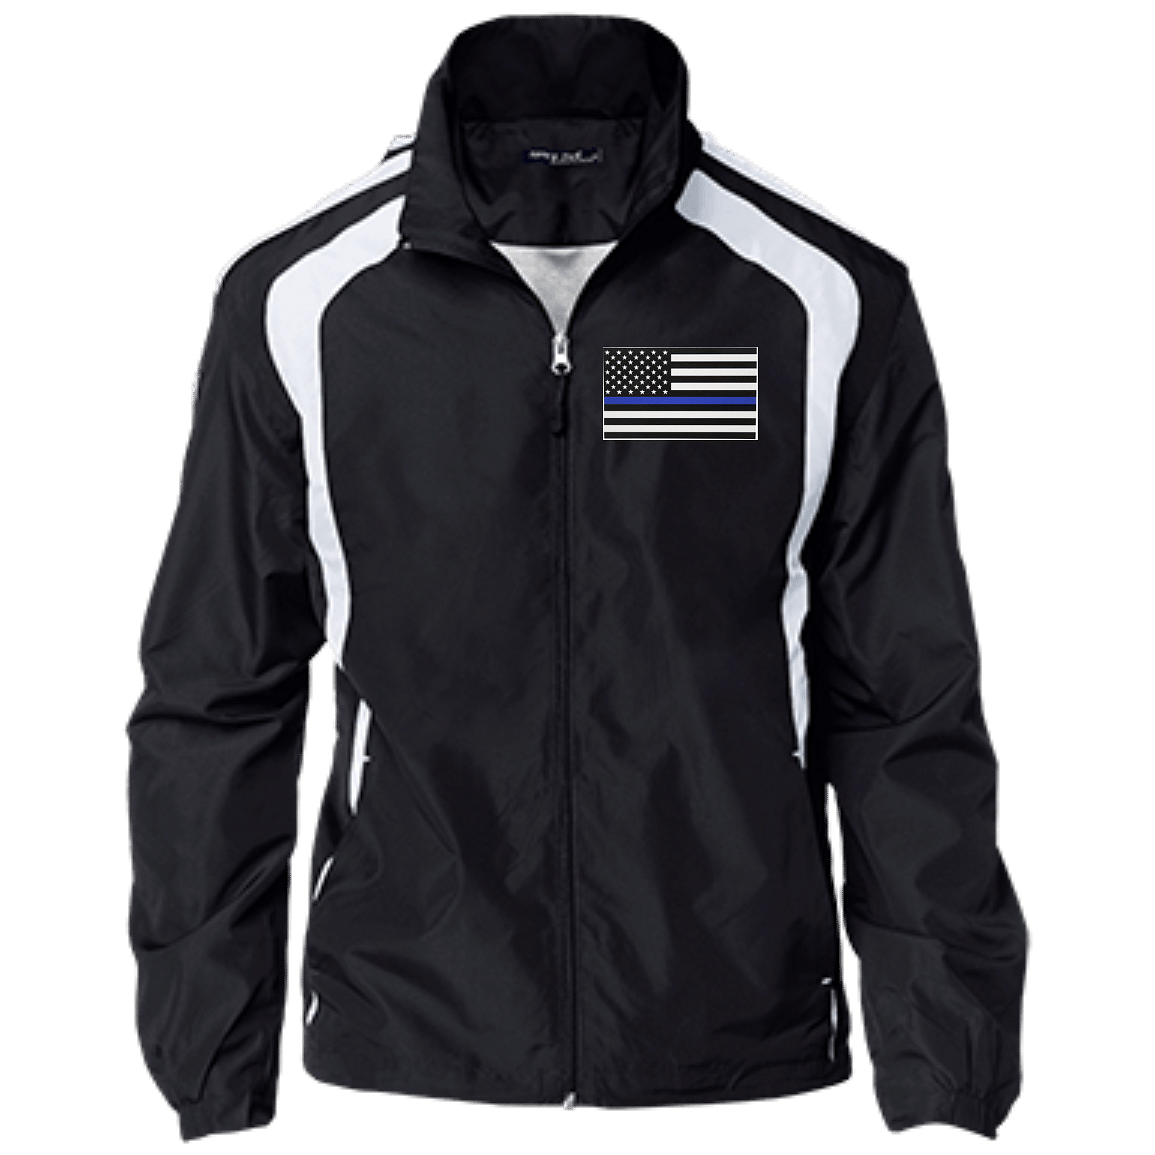 YST60 Youth Colorblock Jacket